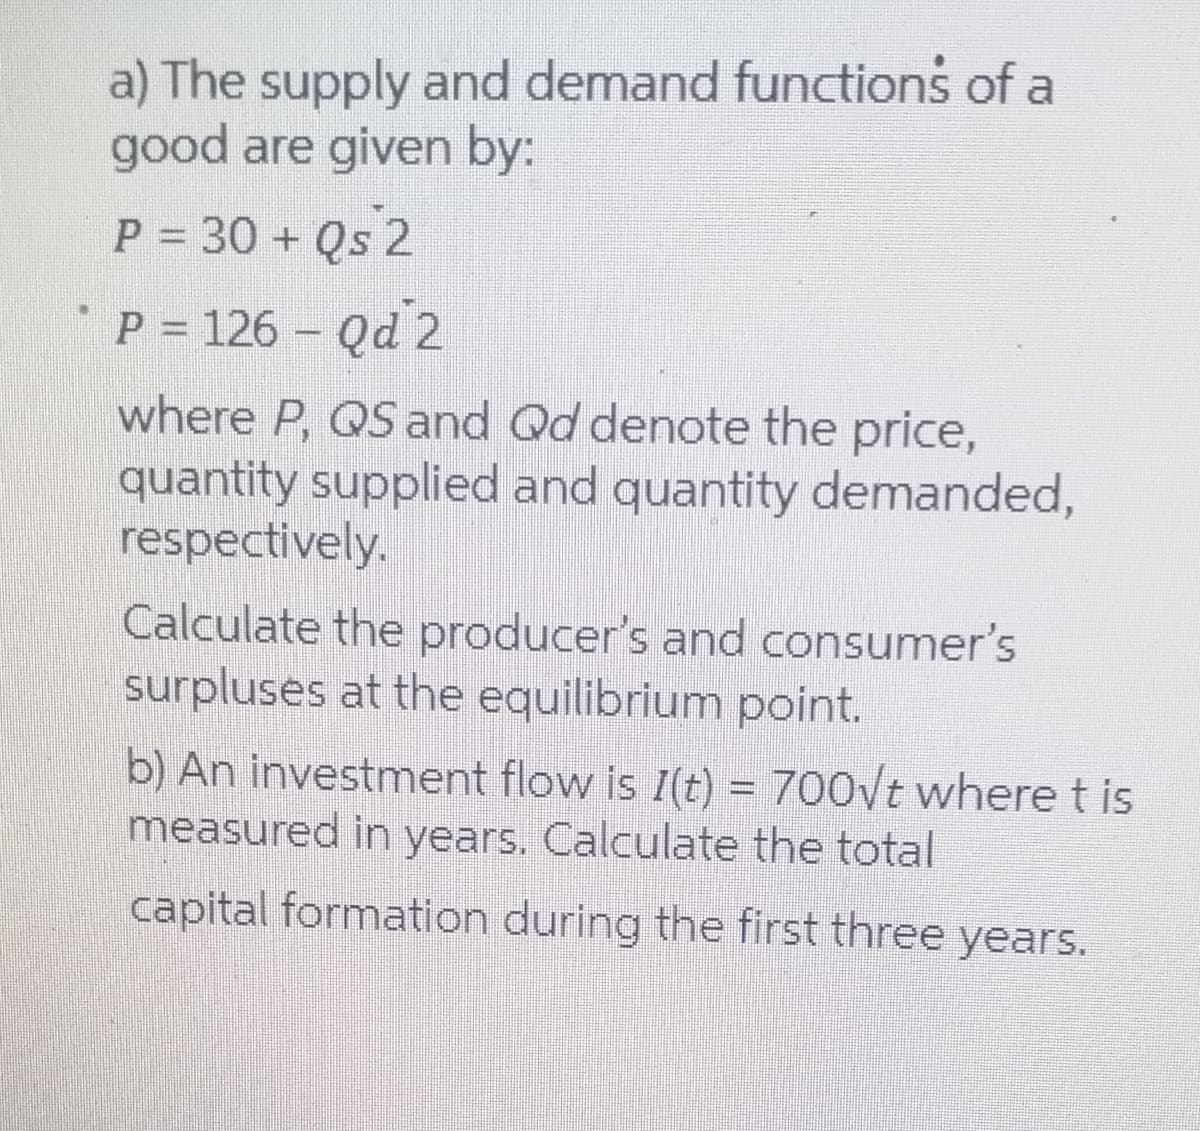 a) The supply and demand functions of a
good are given by:
P = 30 + Qs 2
P = 126 – Qd 2
where P, QS and Qd denote the price,
quantity supplied and quantity demanded,
respectively.
Calculate the producer's and consumer's
surpluses at the equilibrium point.
b) An investment flow is I(t) = 700/t where t is
measured in years. Calculate the total
capital formation during the first three years.
